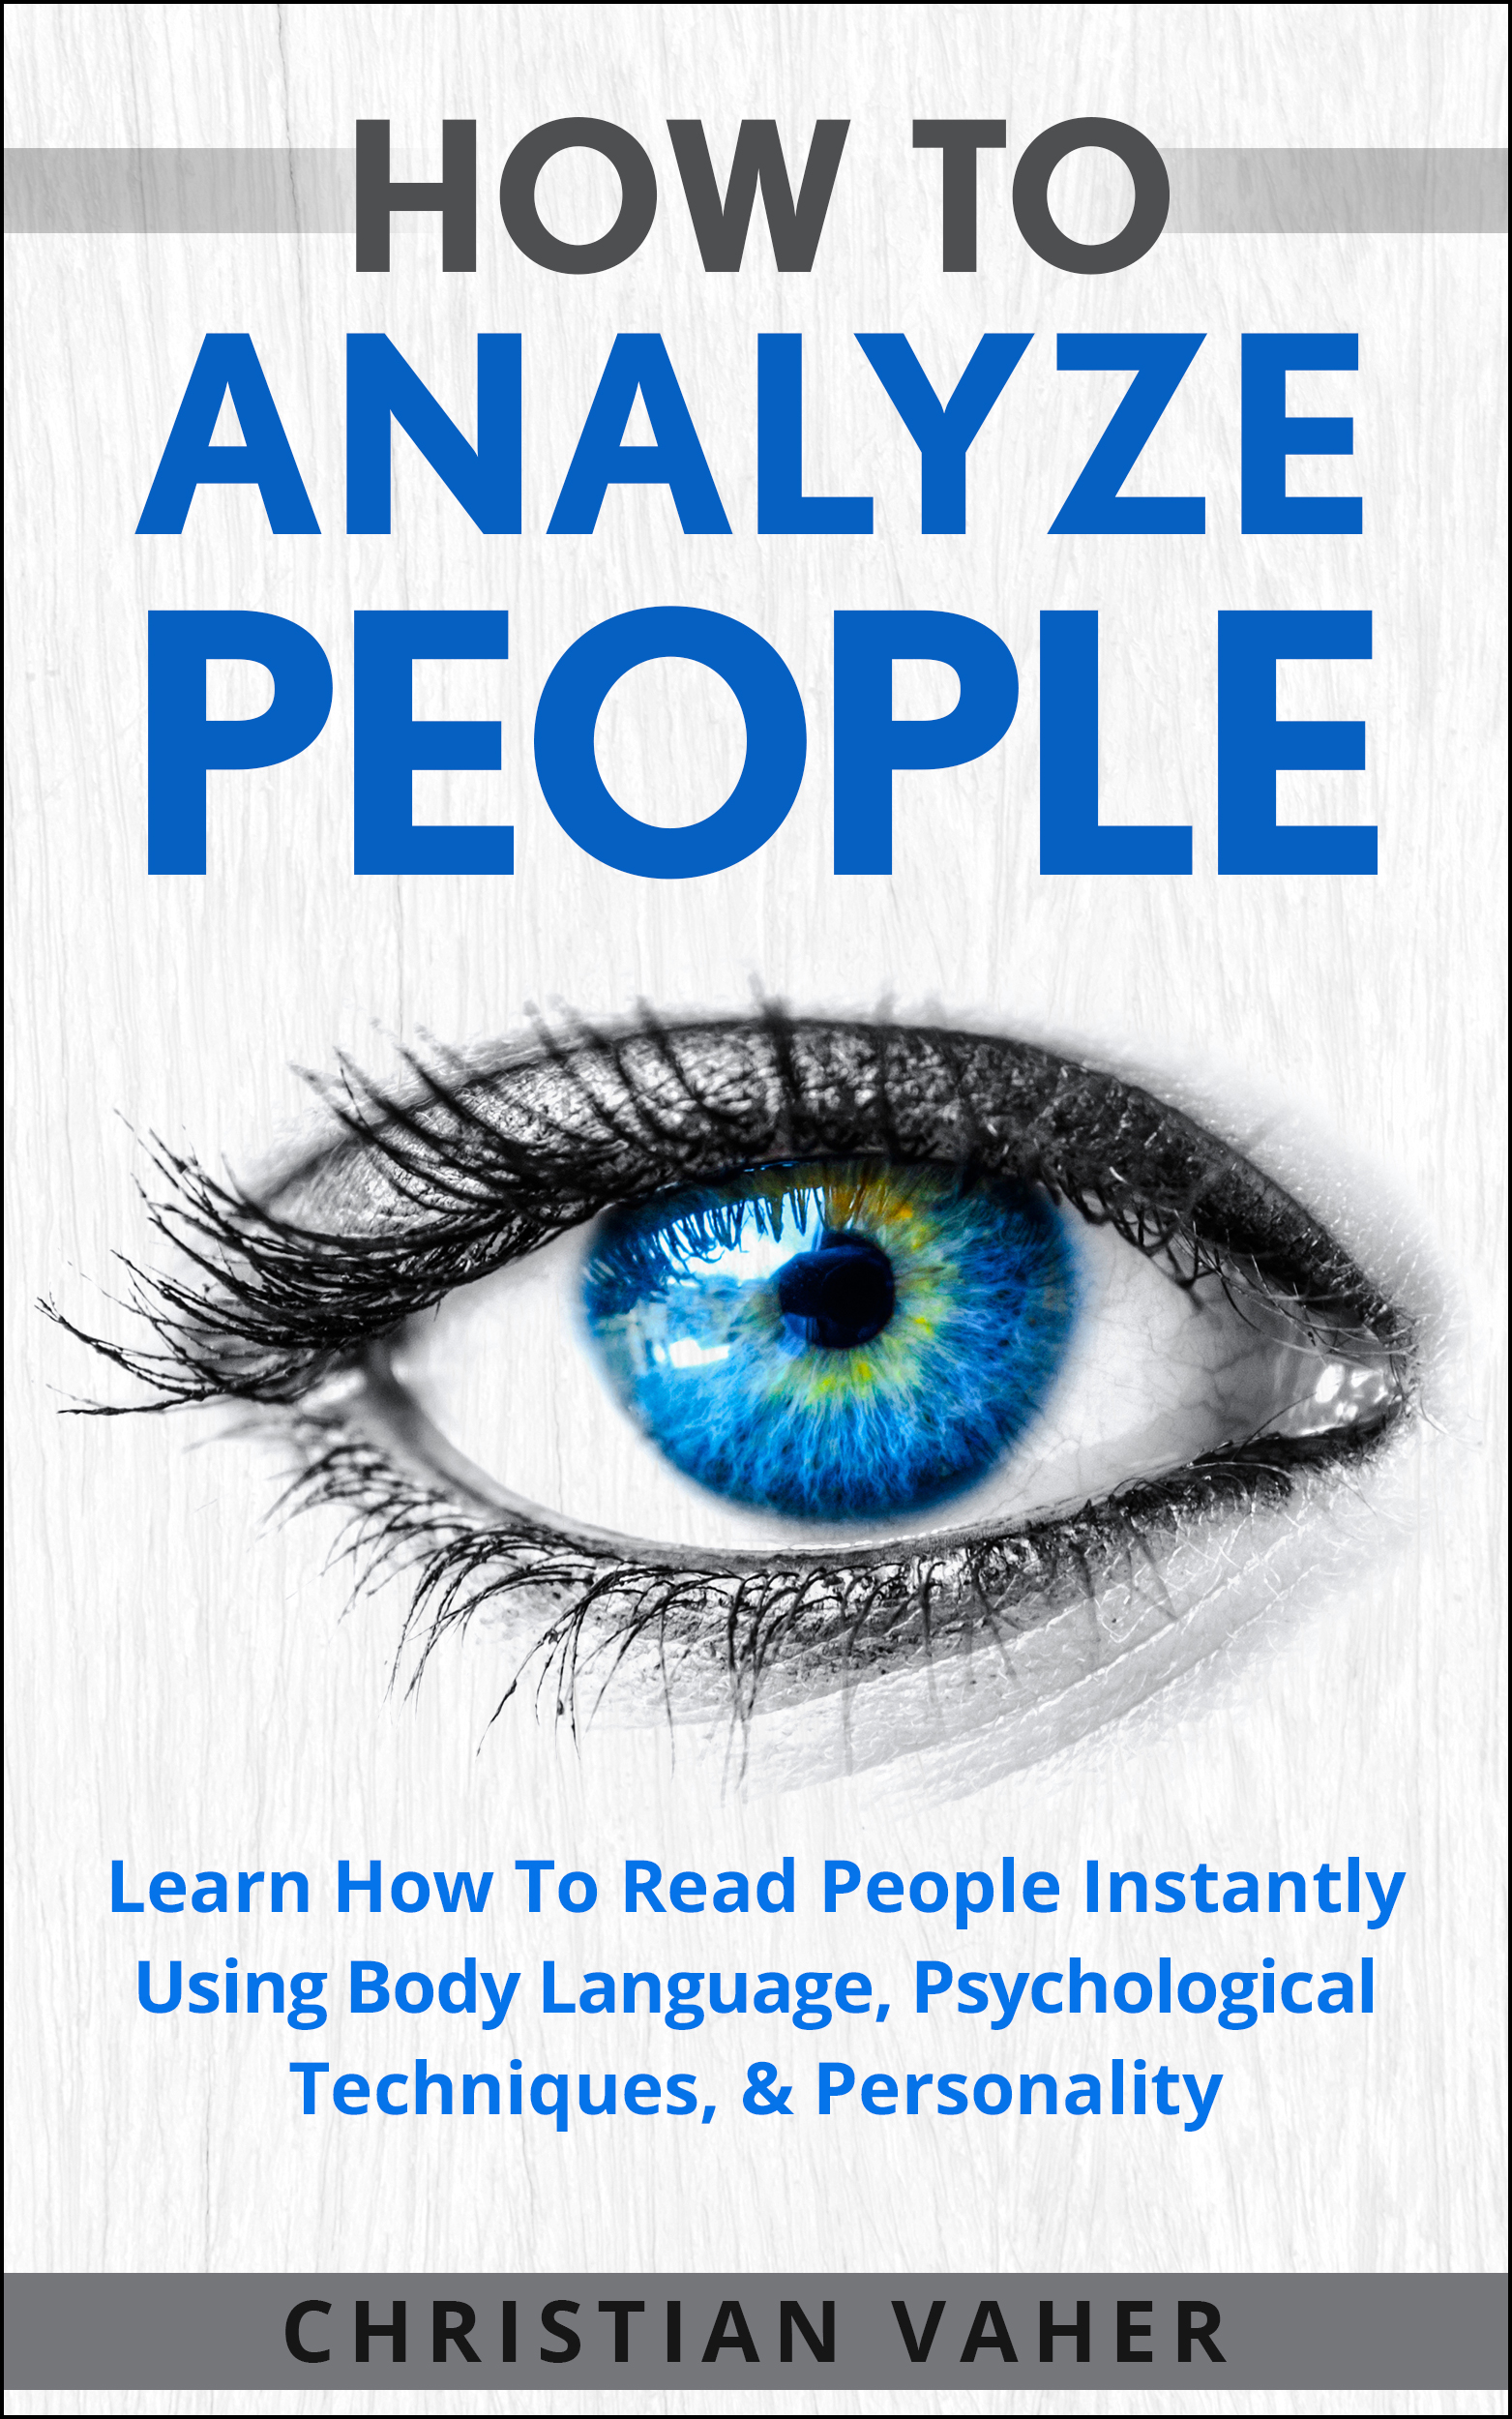 FREE: How To Analyze People: Learn How To Analyze People: How To Read People Instantly Using Body Language, Psychological Techniques, & Personality by Christian Vaher